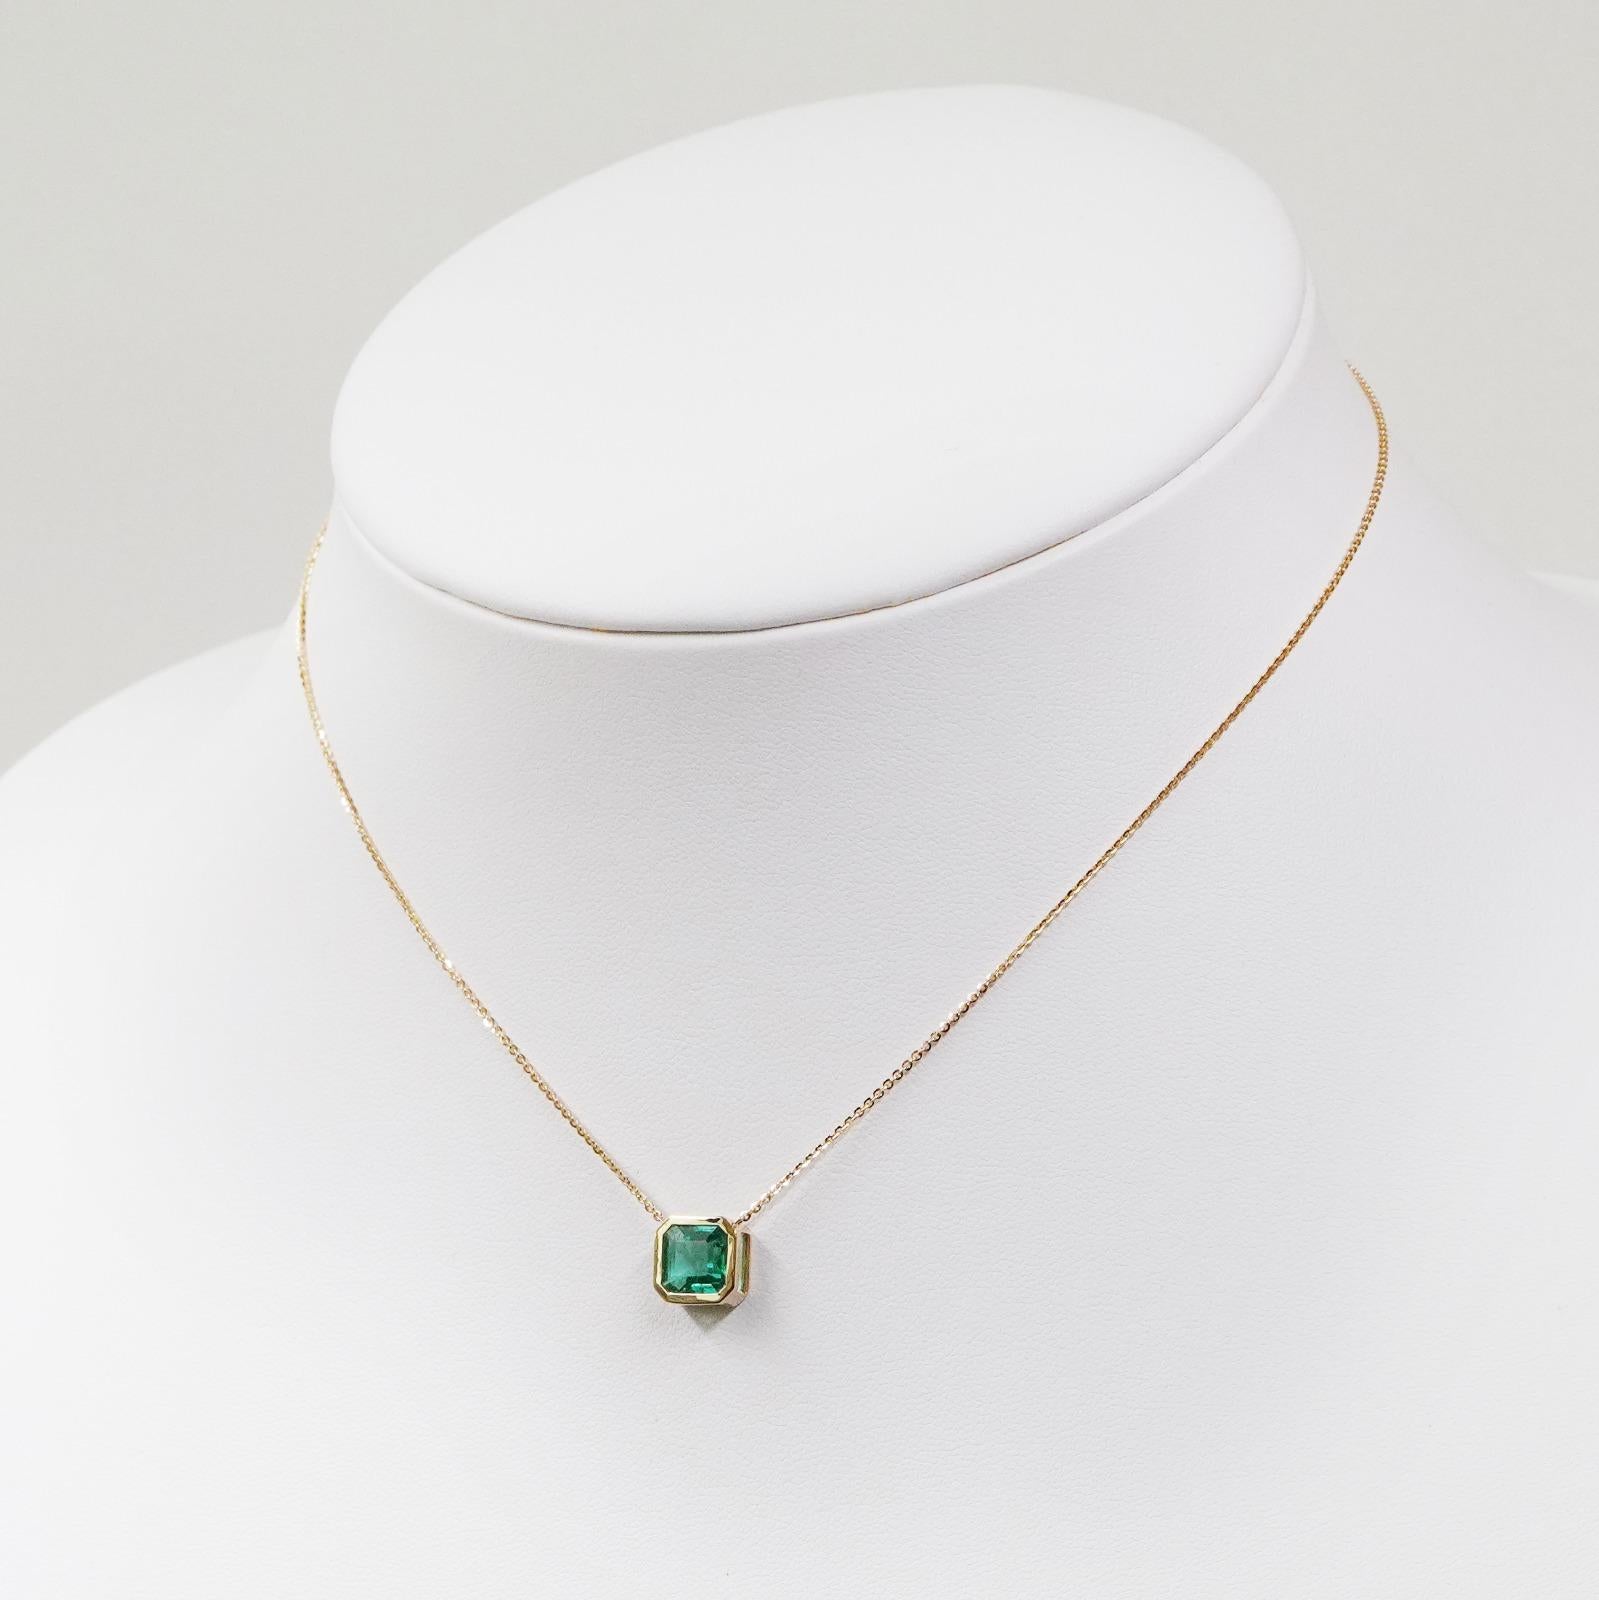 Octagon Cut 18K Yellow Gold Necklace With Emerald 1.59 ct. For Sale